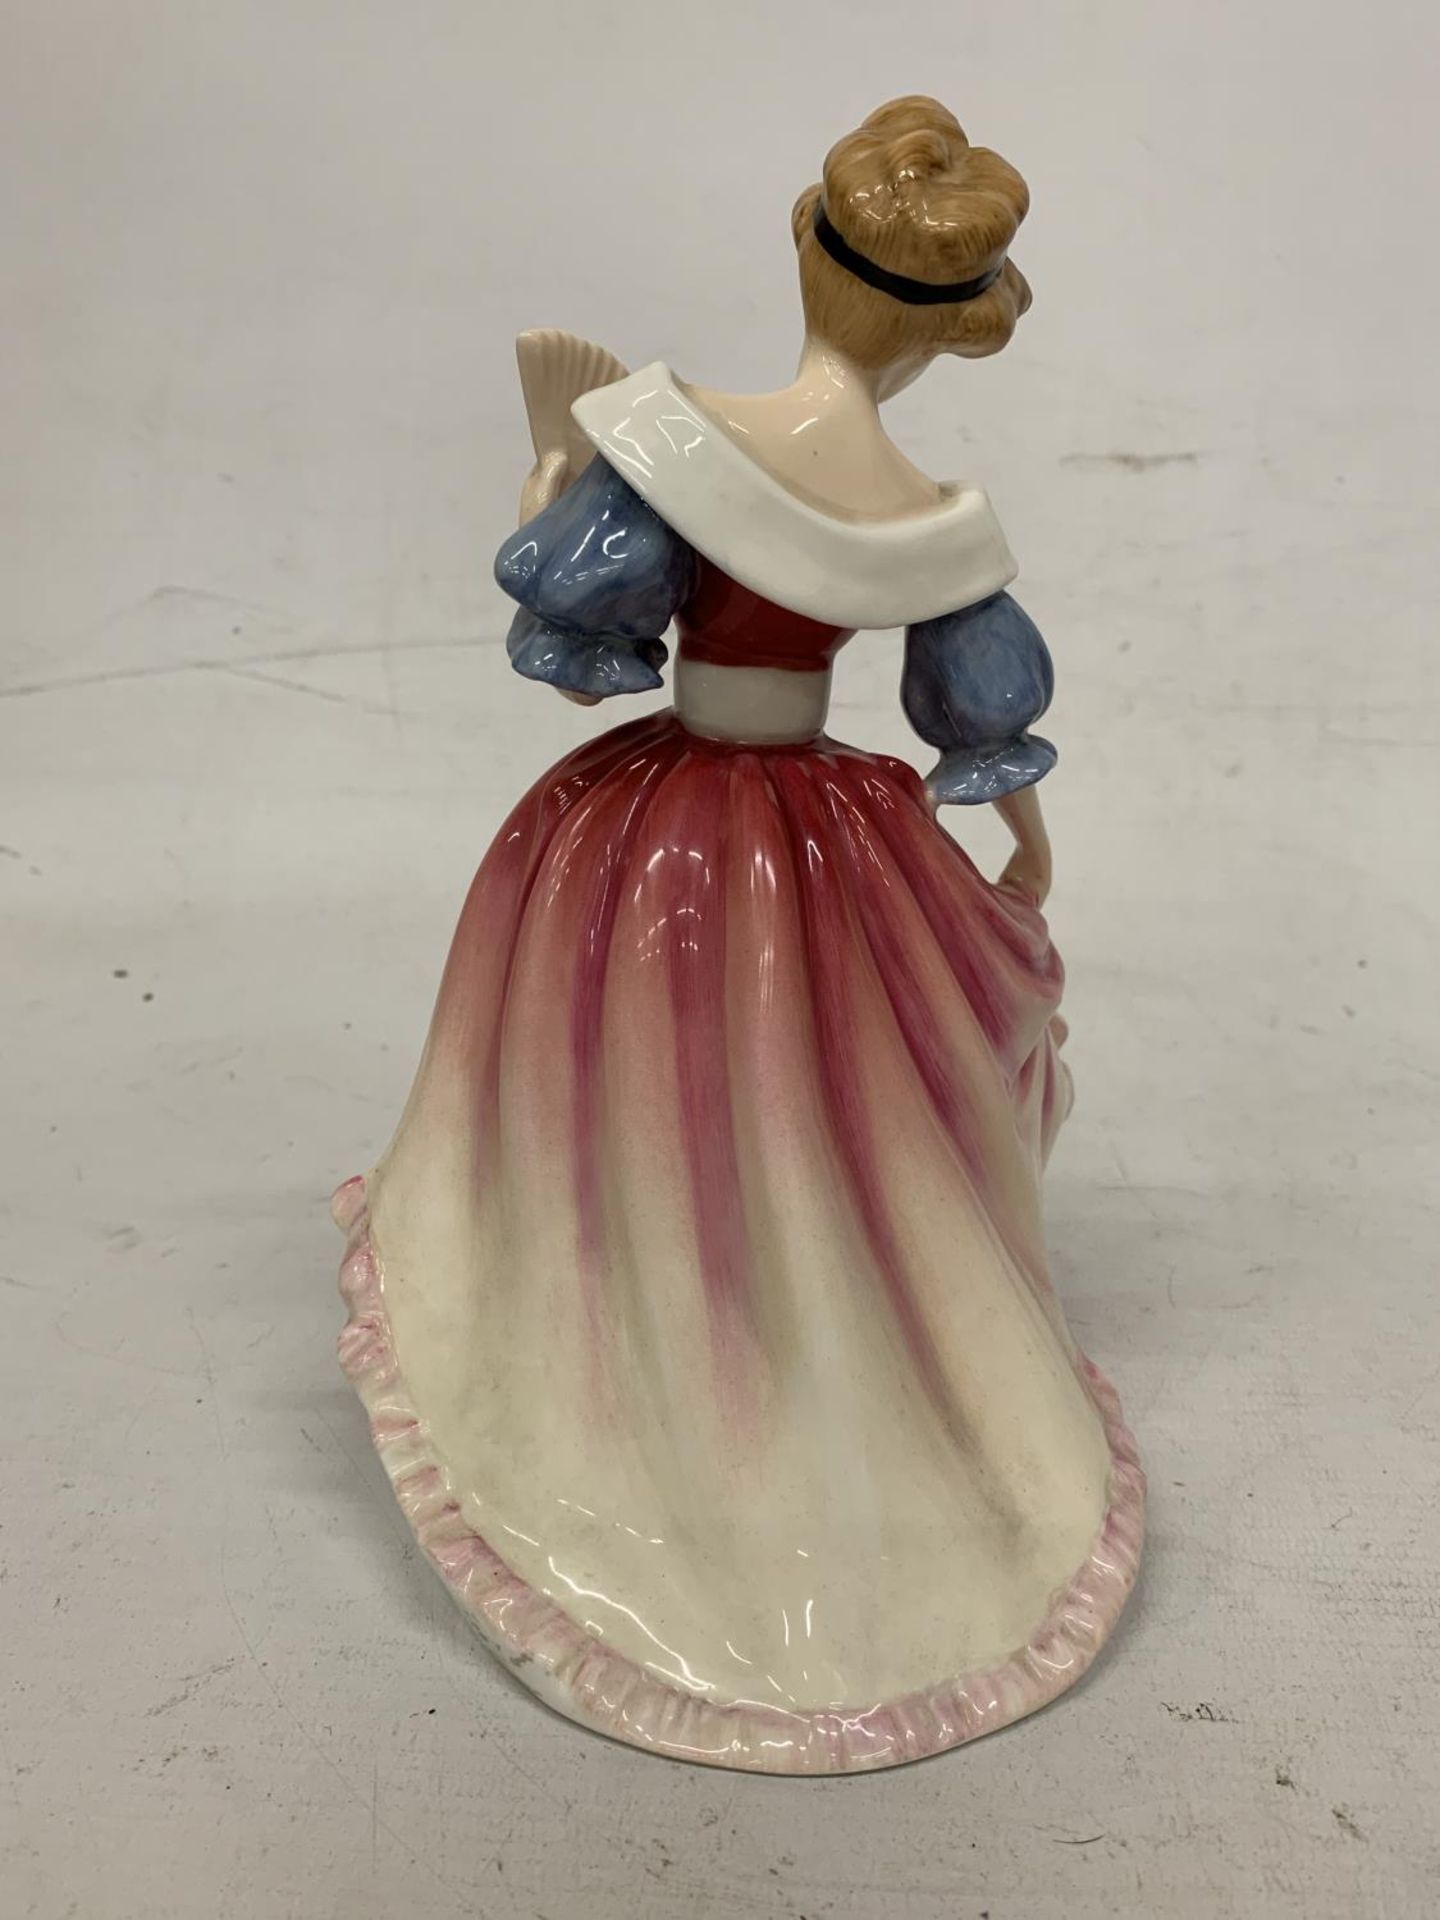 A ROYAL DOULTON FIGUREOF OF THE YEAR "AMY" HN 3316 - Image 3 of 5